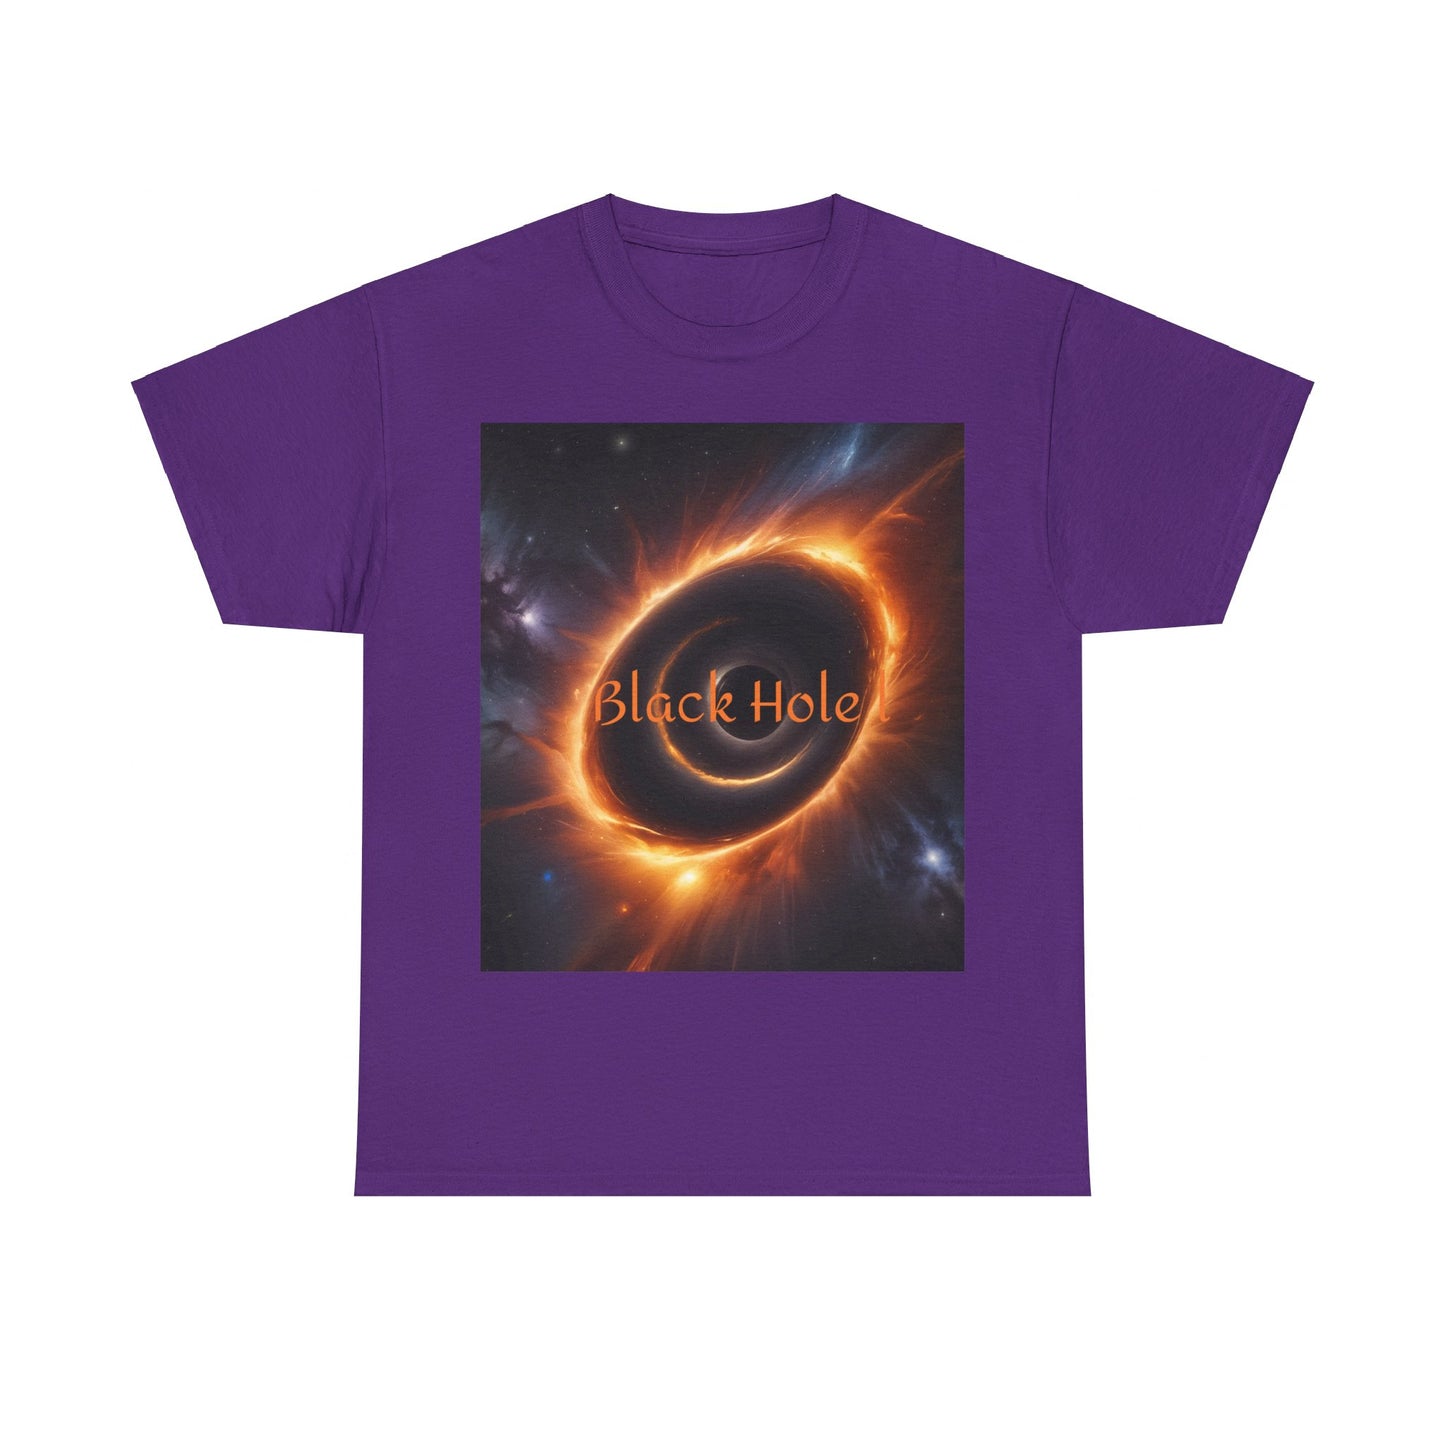 Black Hole Tee with Poem - Unisex Heavy Cotton Tee in Black and other Dark Colors